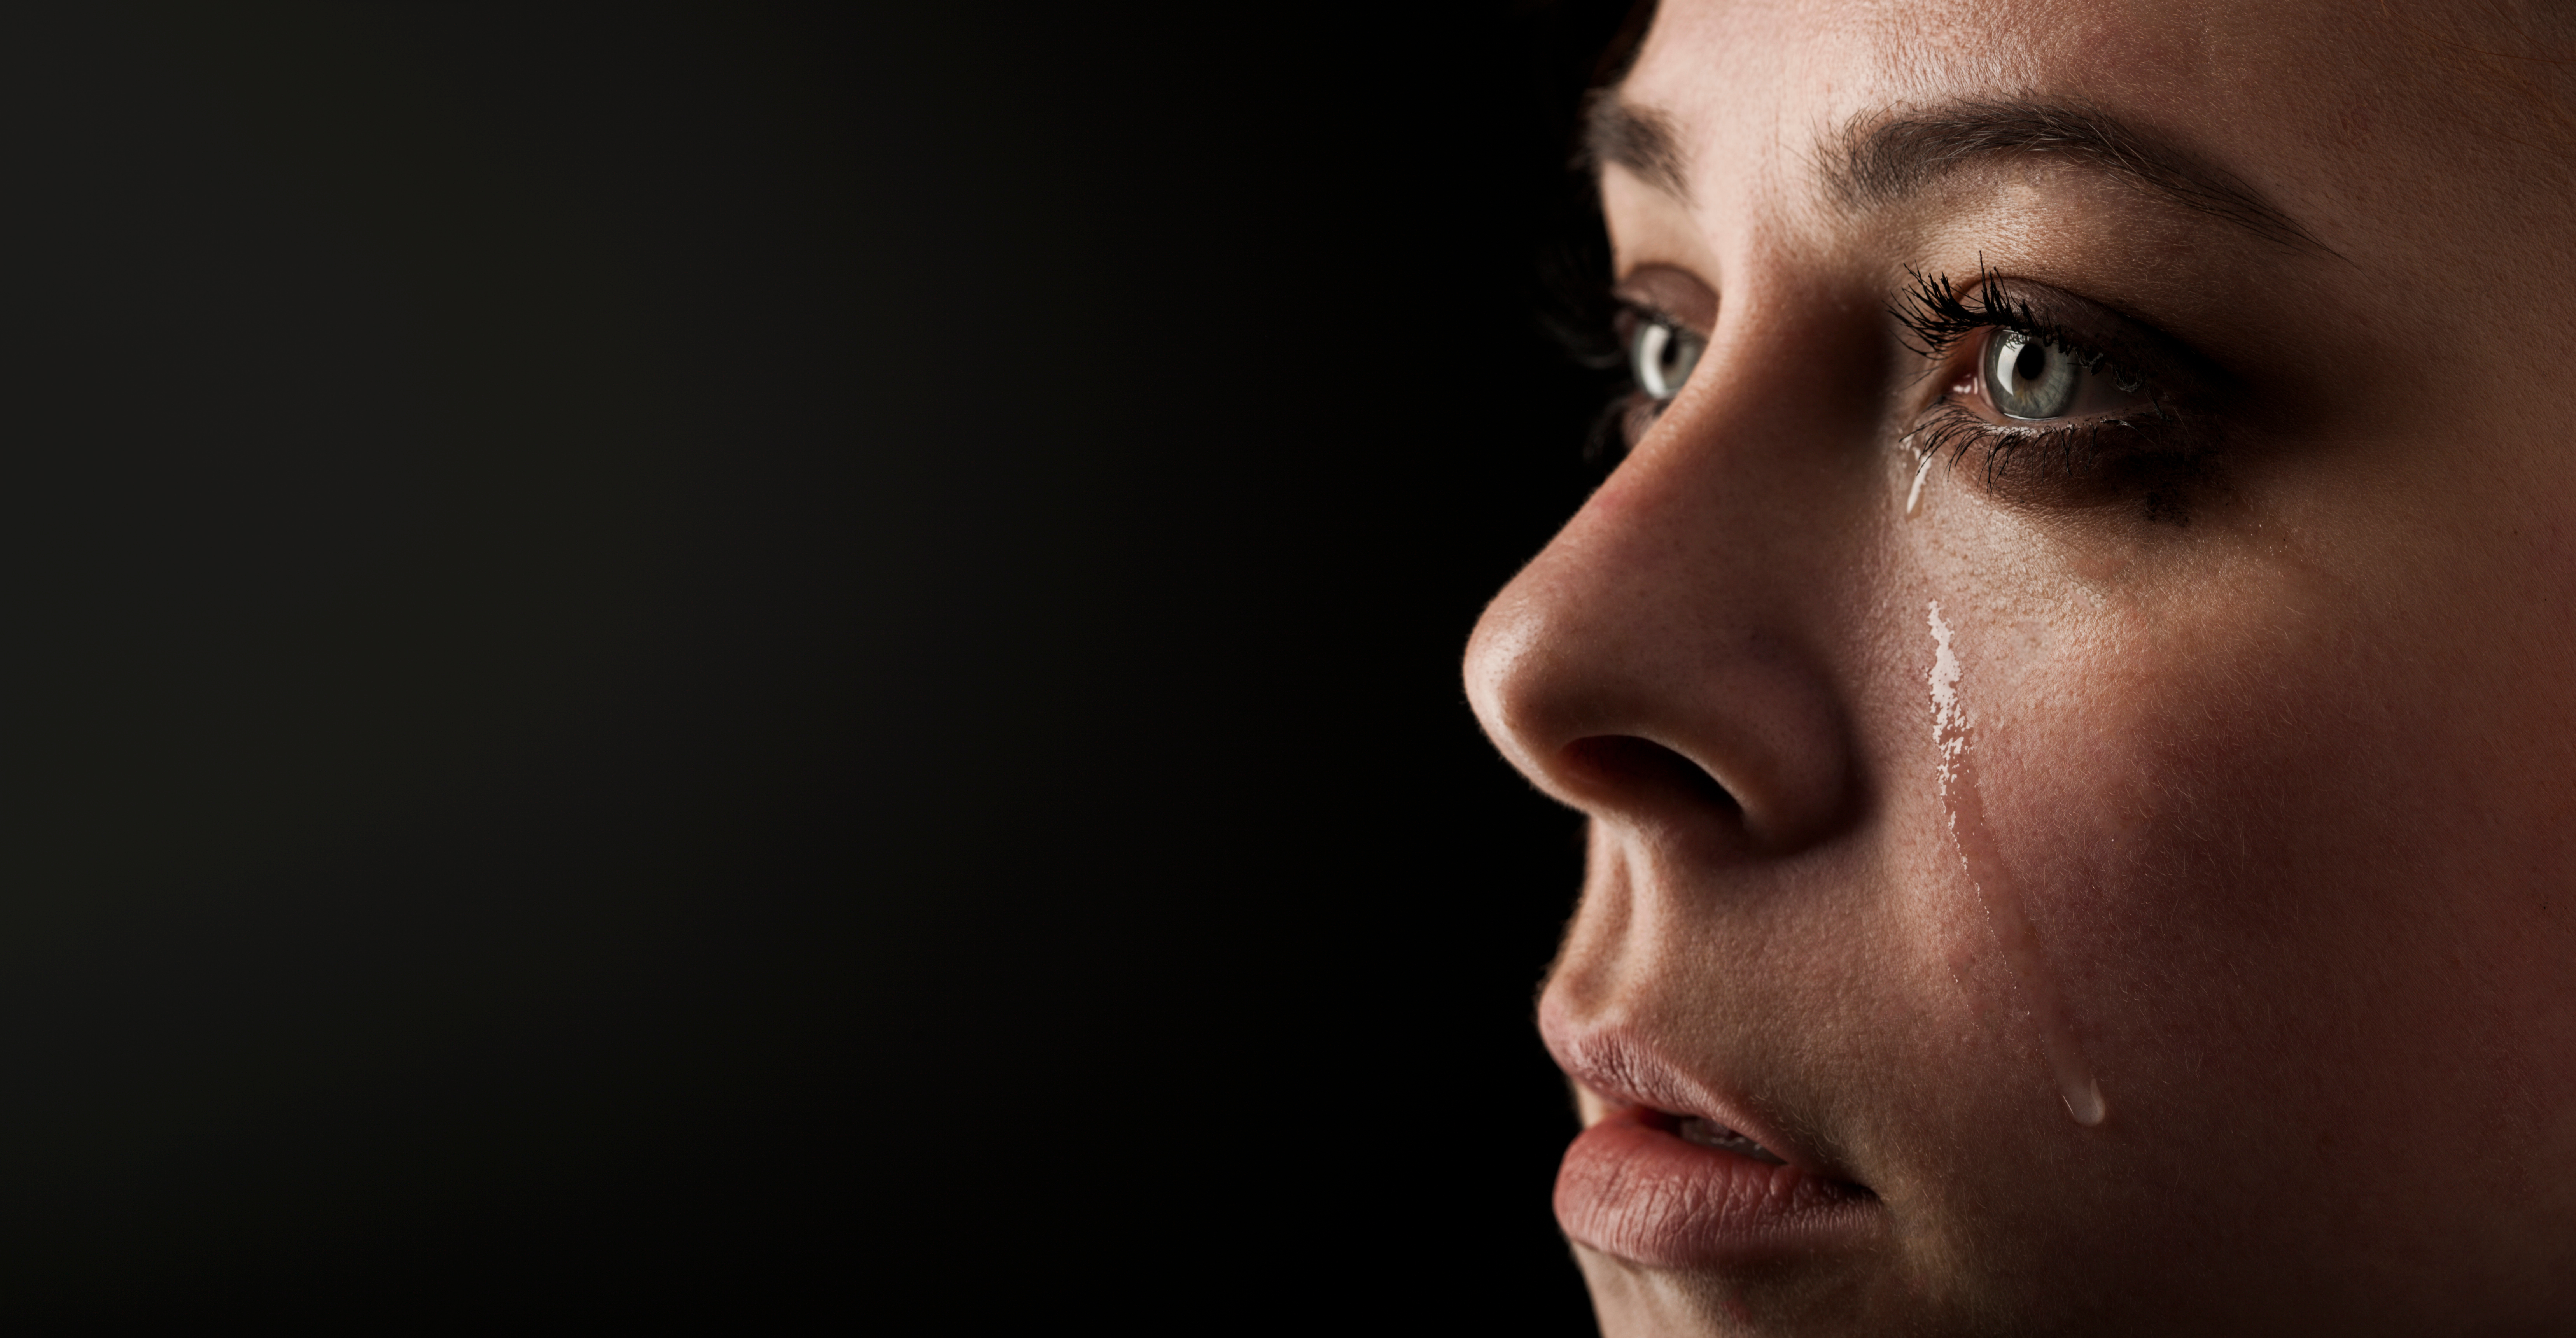 Beautiful girl cries on black background. | Source: Shutterstock